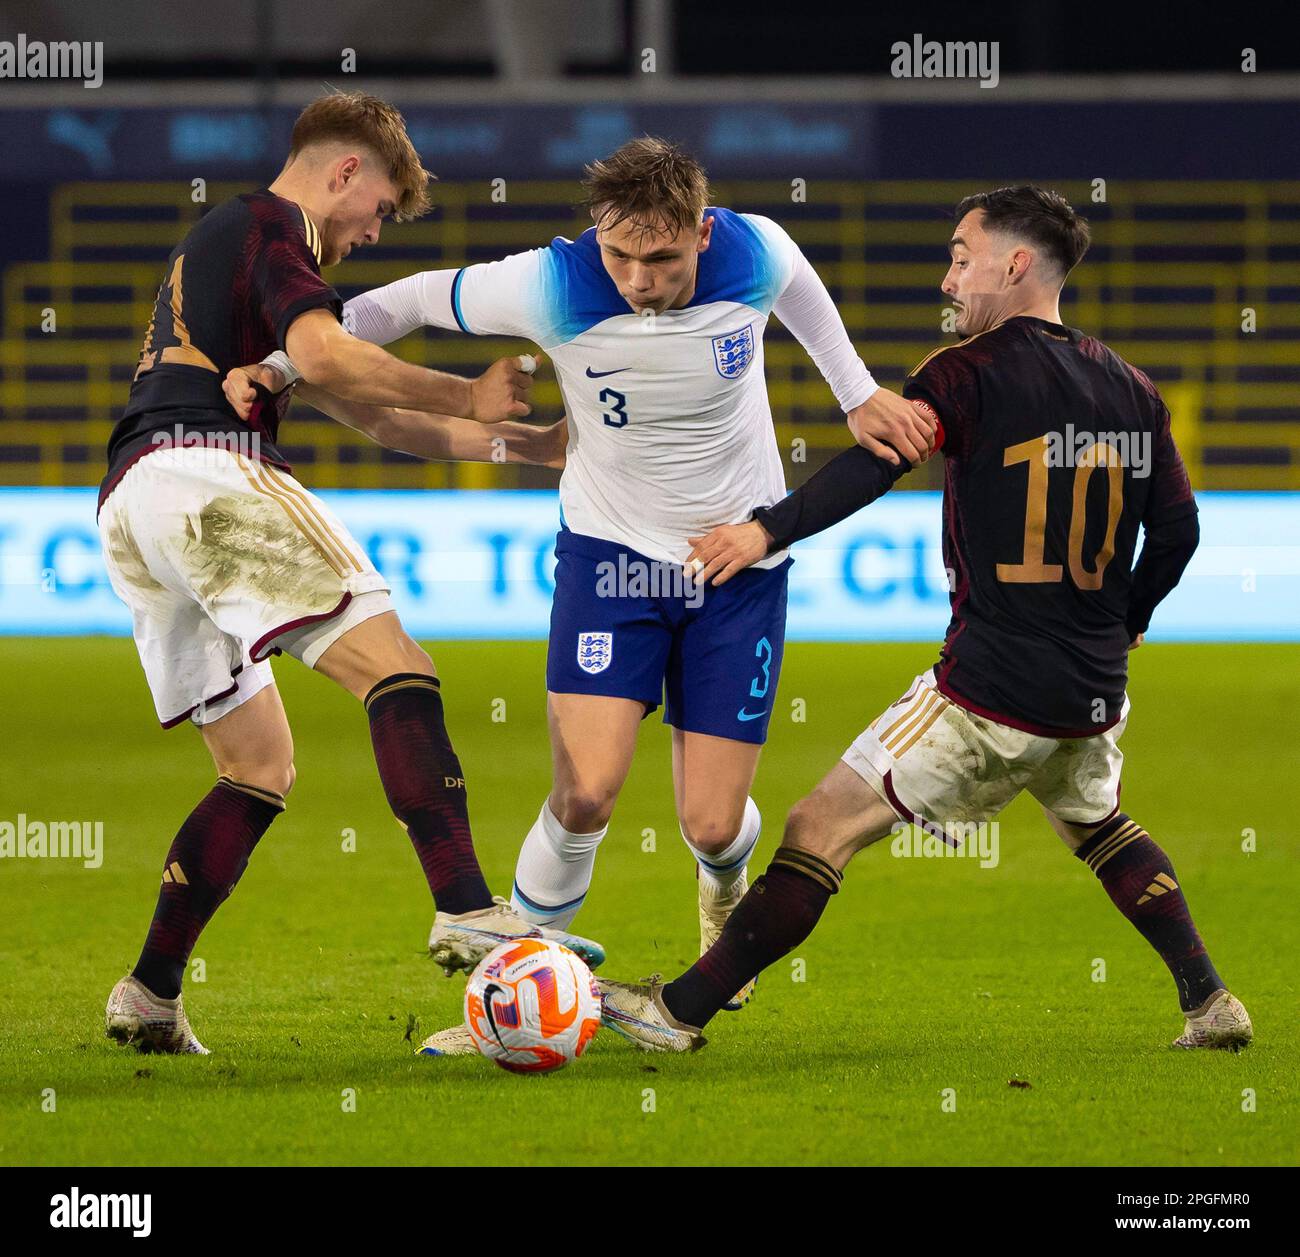 Manchester, UK. 22nd Mar, 2023. Manchester, England, March 22nd 2023: Callum Doyle (3 England) dribbles past two Germany players during the International Friendly football match between England and Germany at the City Football Academy Stadium in Manchester, England. (James Whitehead/SPP) Credit: SPP Sport Press Photo. /Alamy Live News Stock Photo